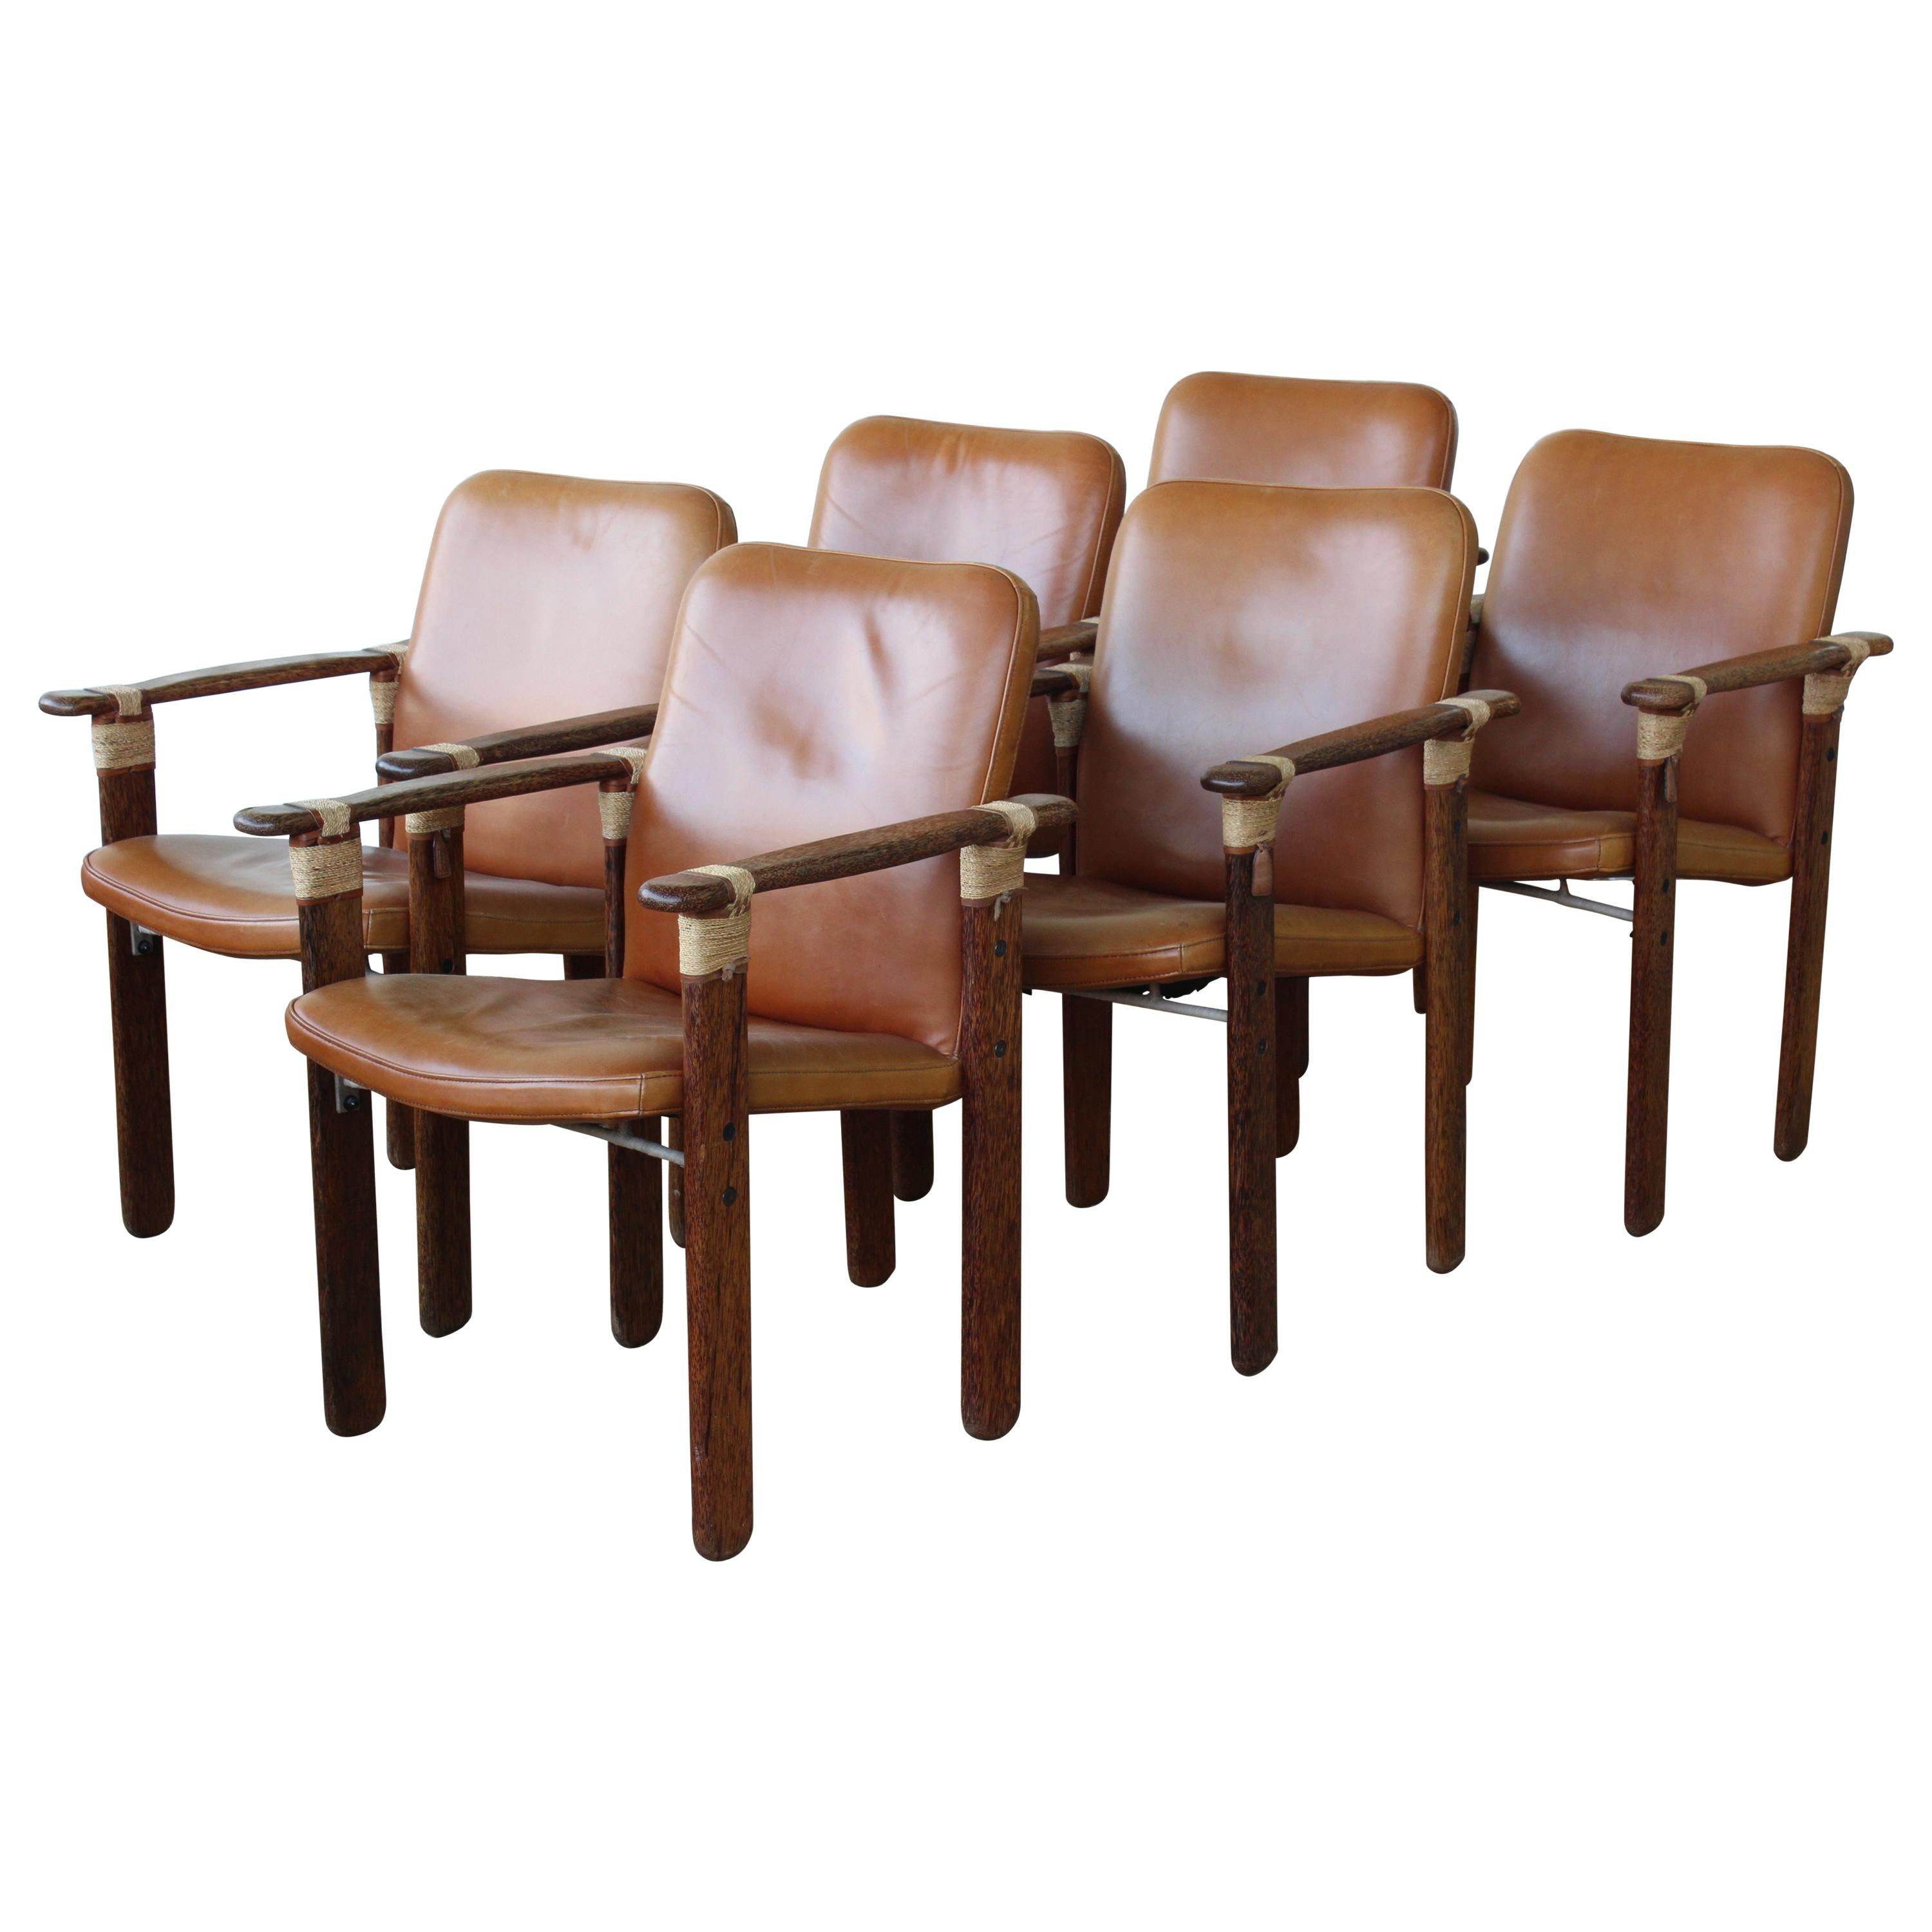 Set of Six Palm Wood Armchairs by Pacific Green, Australia, 1990s